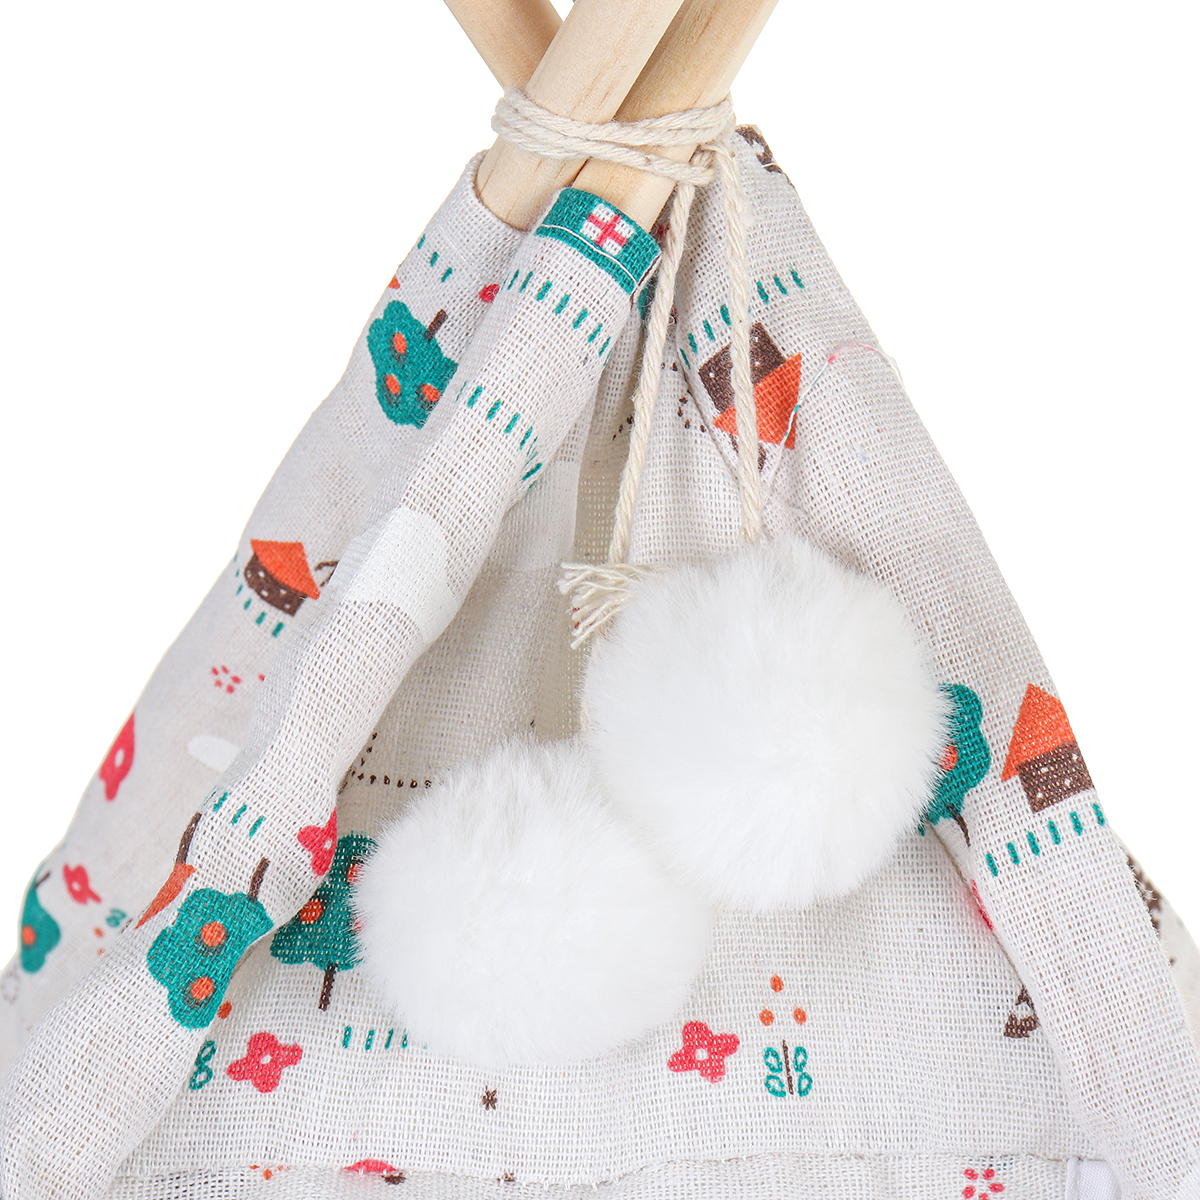 Foldable-Linen-Pet-Bed-Tent-Dog-House-Bed-Washable-Puppy-Cat-Play-Indoor-Teepee-Mat-1691904-9